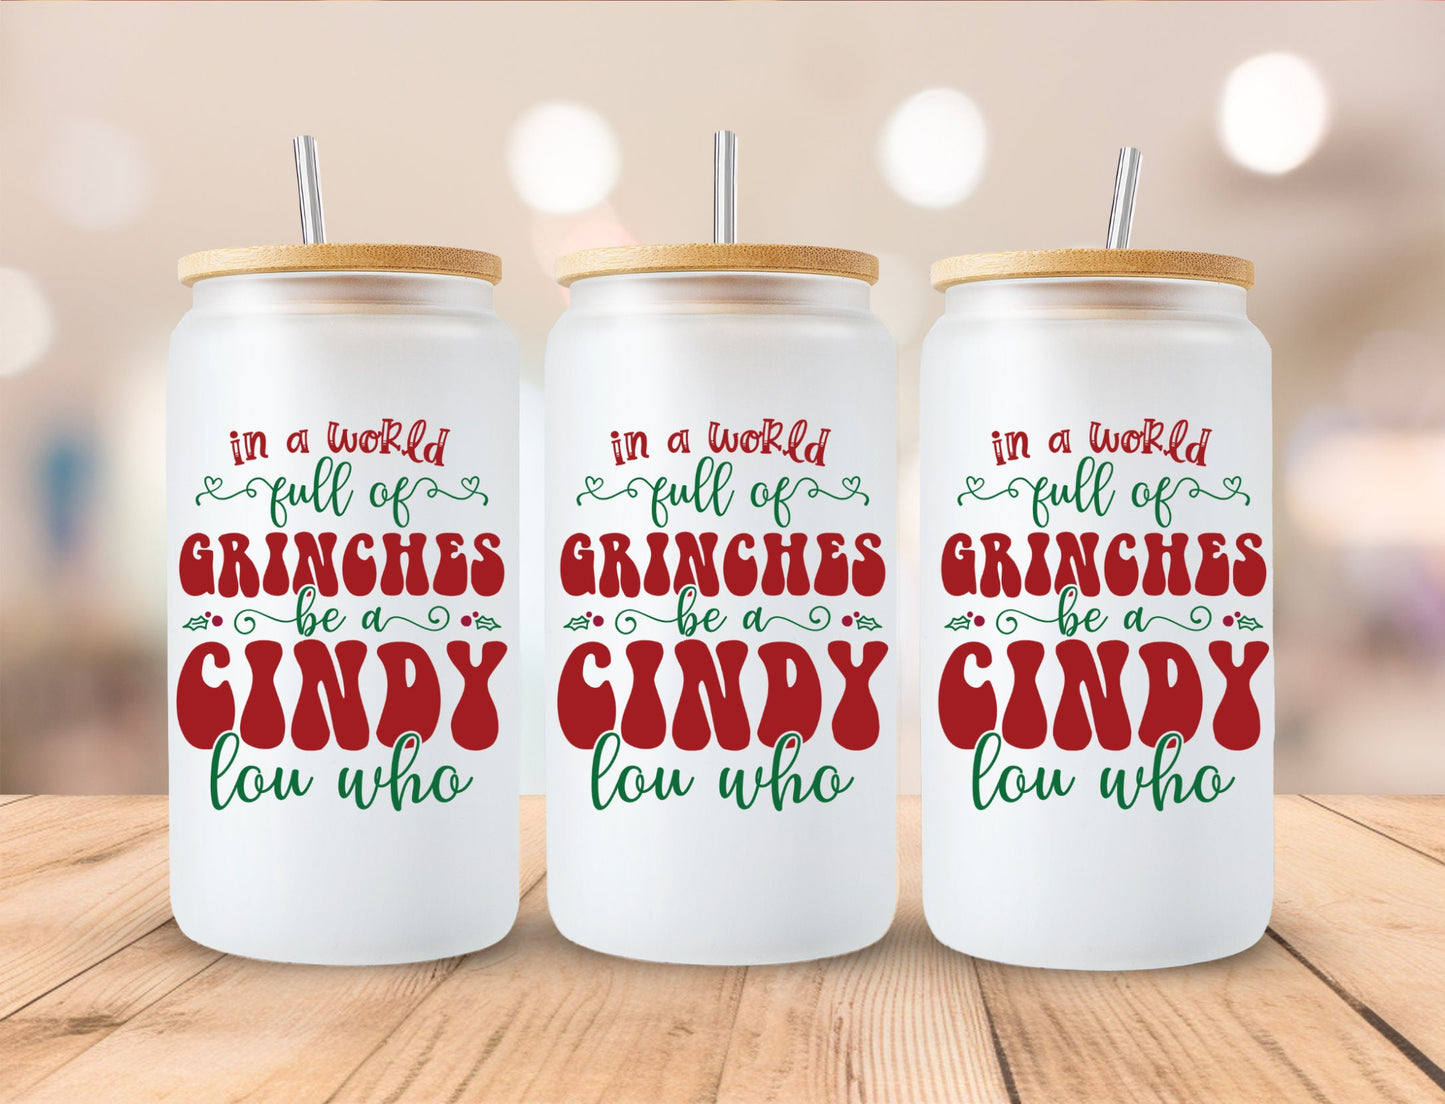 16oz Grinch Tumbler, Christmas Tumbler Gift, Grinch Gift, Grinchy Christmas, Grinch Coffee Mug, Grinch Tumbler Warp, Gift for Her,The Grinch